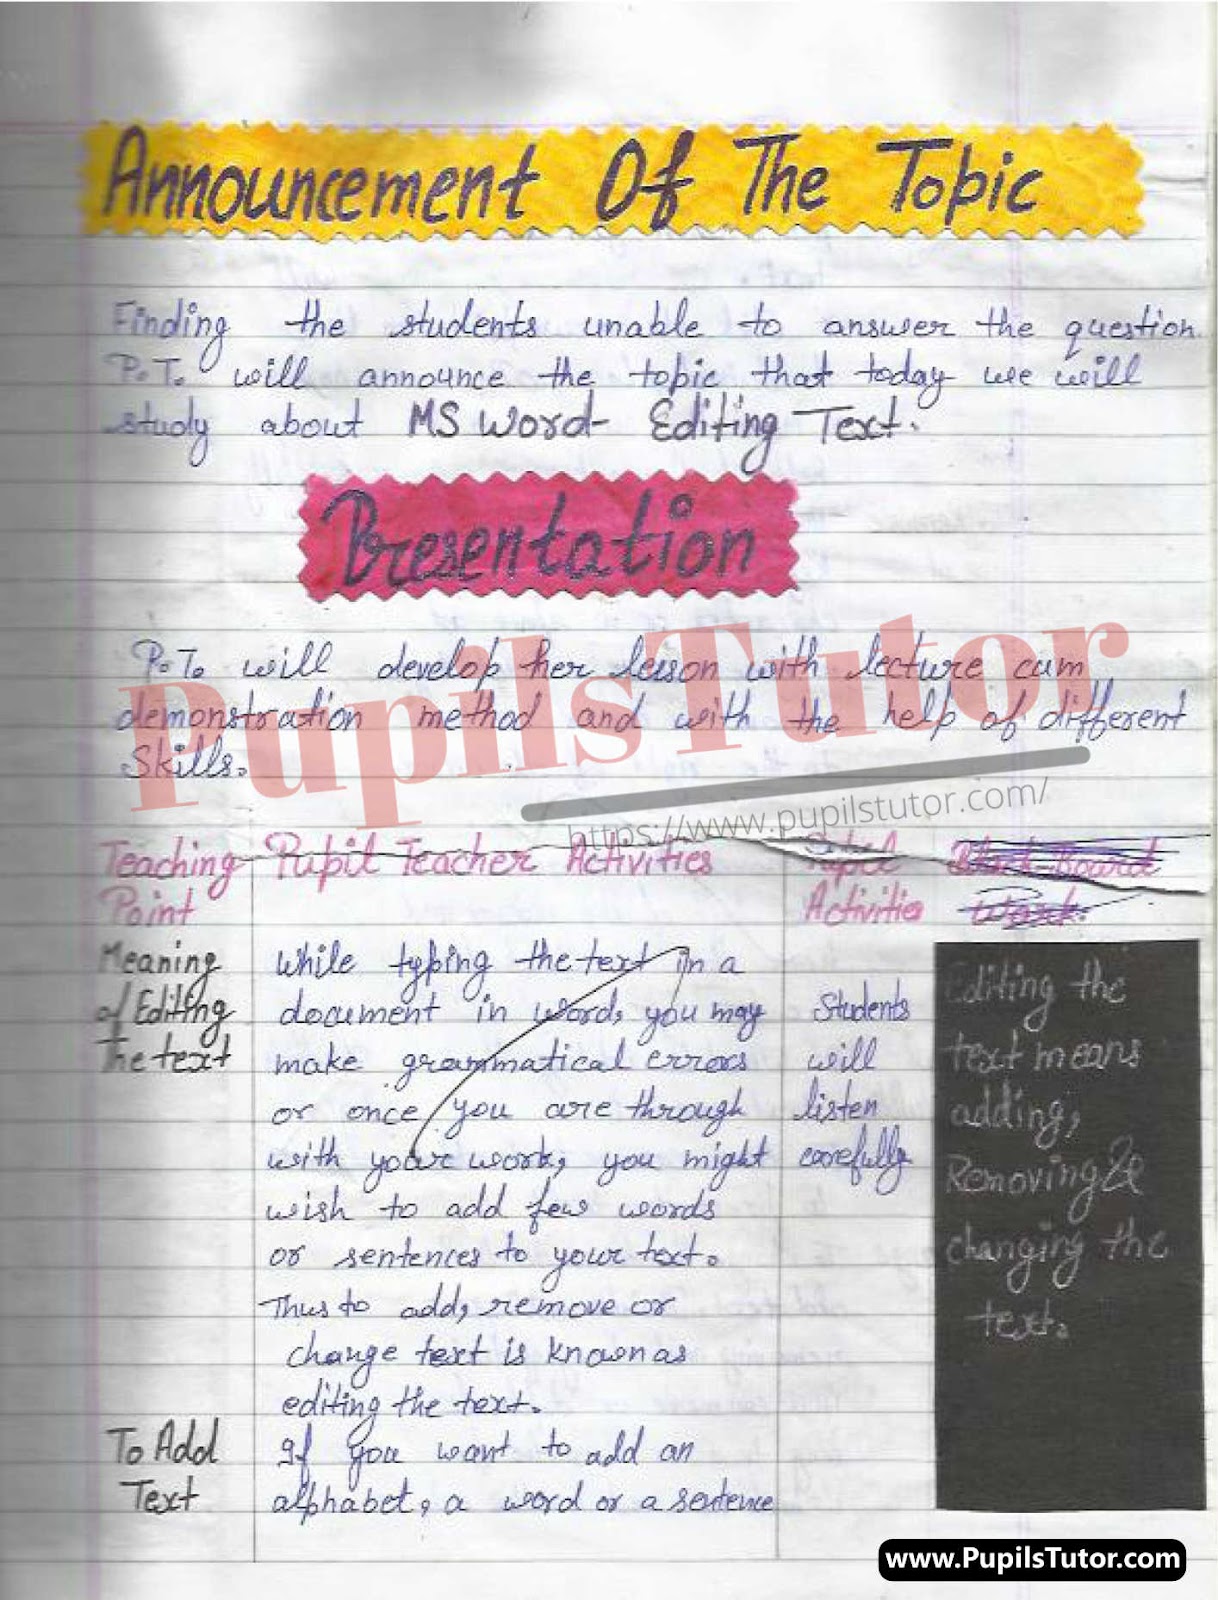 Class/Grade 6 And 7 Computer Lesson Plan On Editing Document In Ms Word For CBSE NCERT KVS School And University College Teachers – (Page And Image Number 3) – www.pupilstutor.com